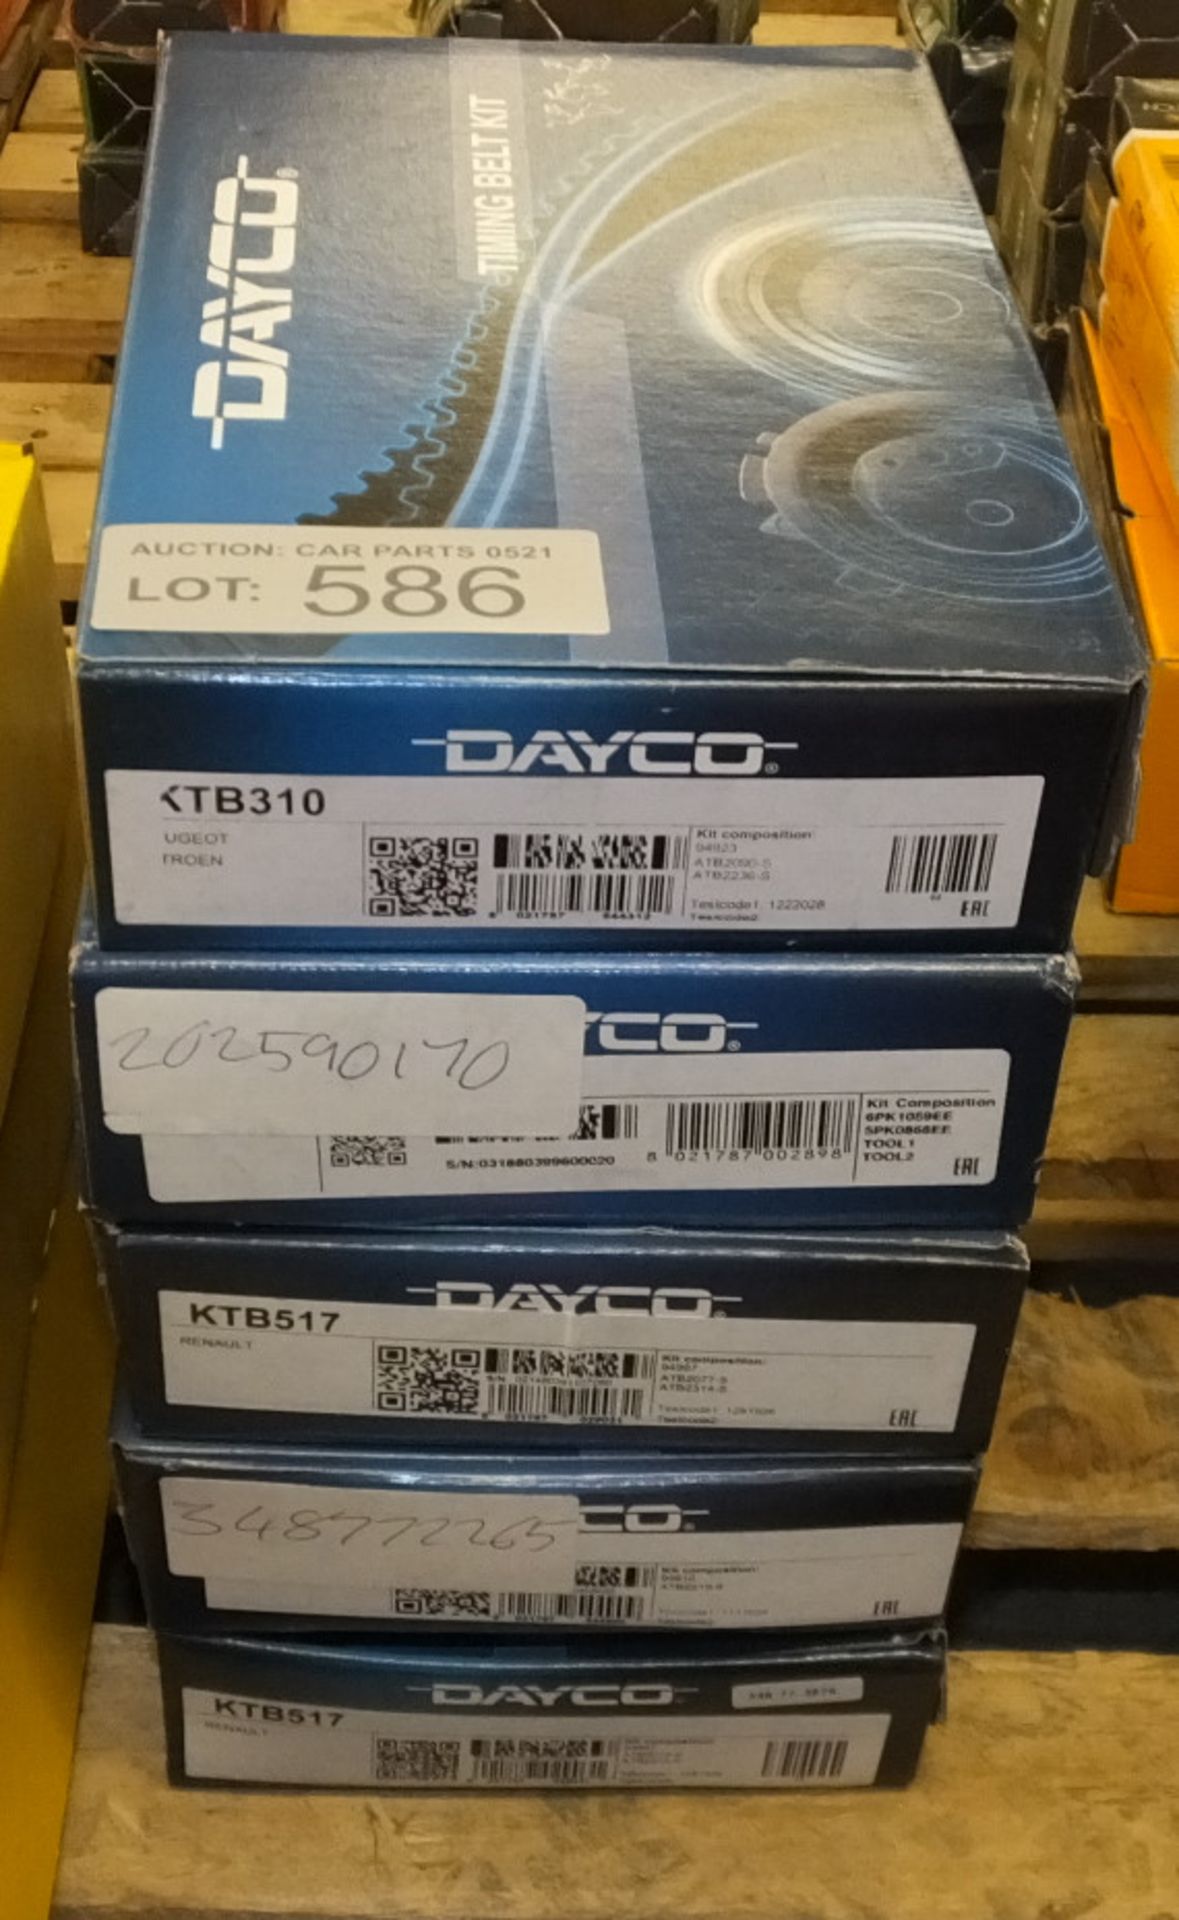 5x Dayco Timing Belt Kits - Please see pictures for examples of model numbers